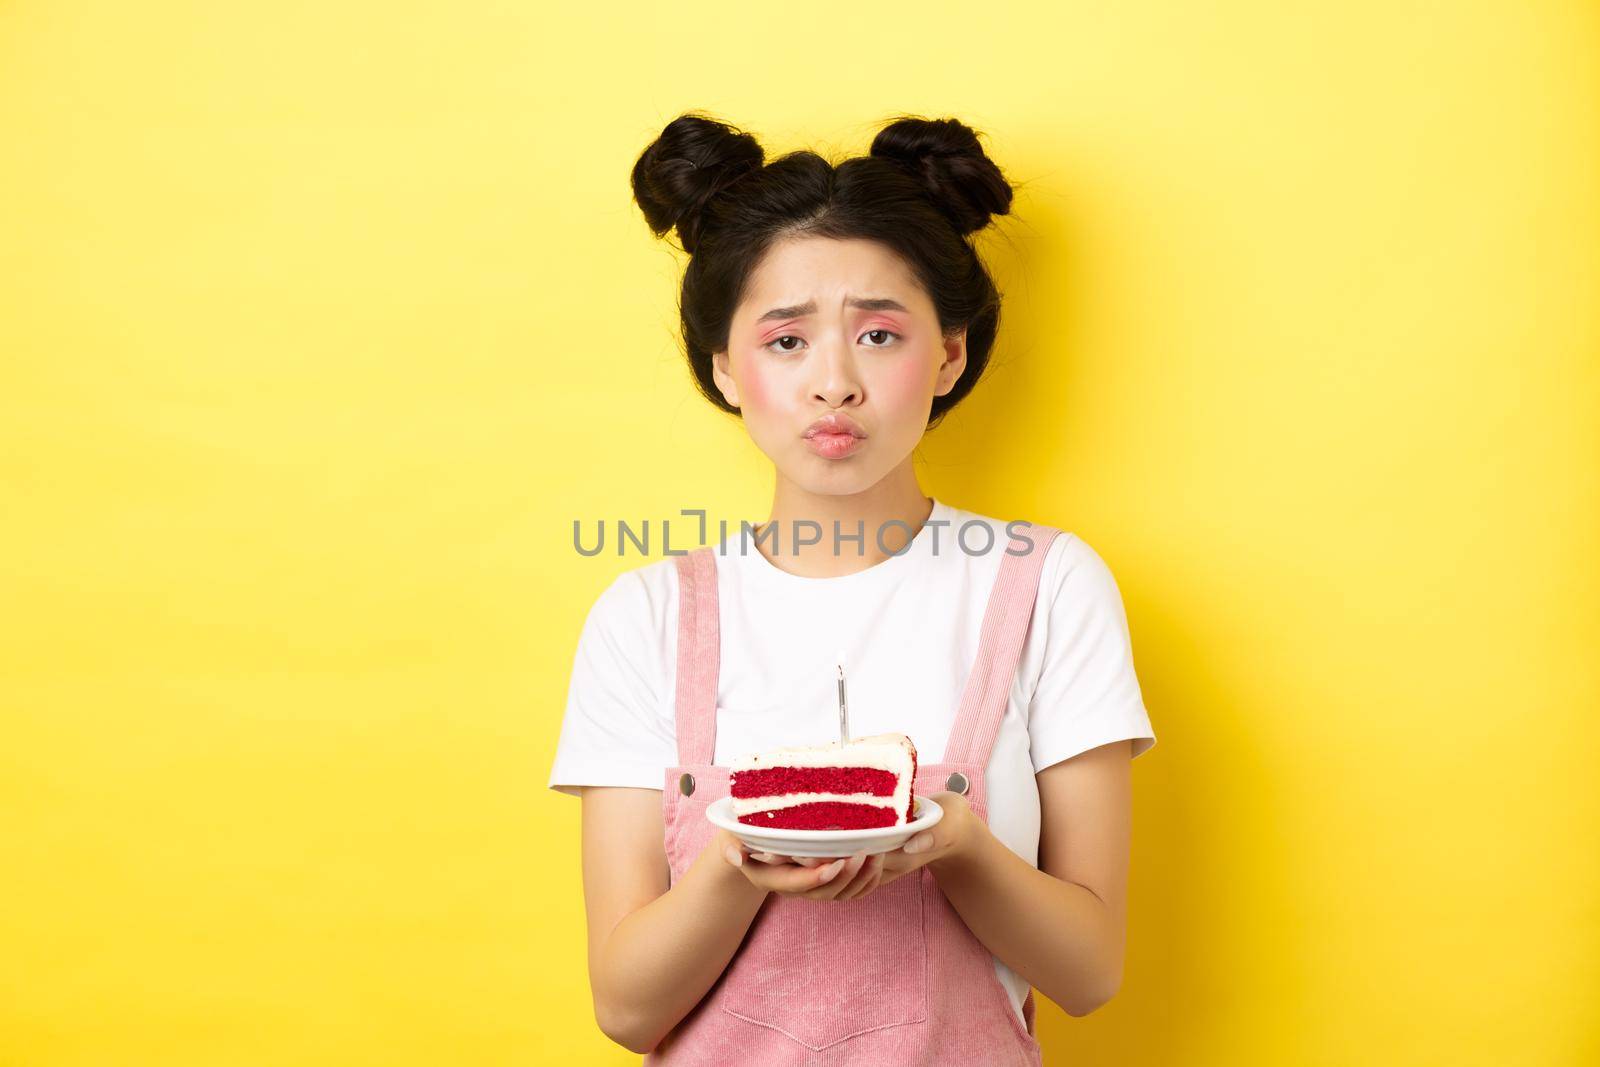 Sad and lonely birthday girl frowning upset, holding birthday cake with candle, making wish, standing on yellow background.